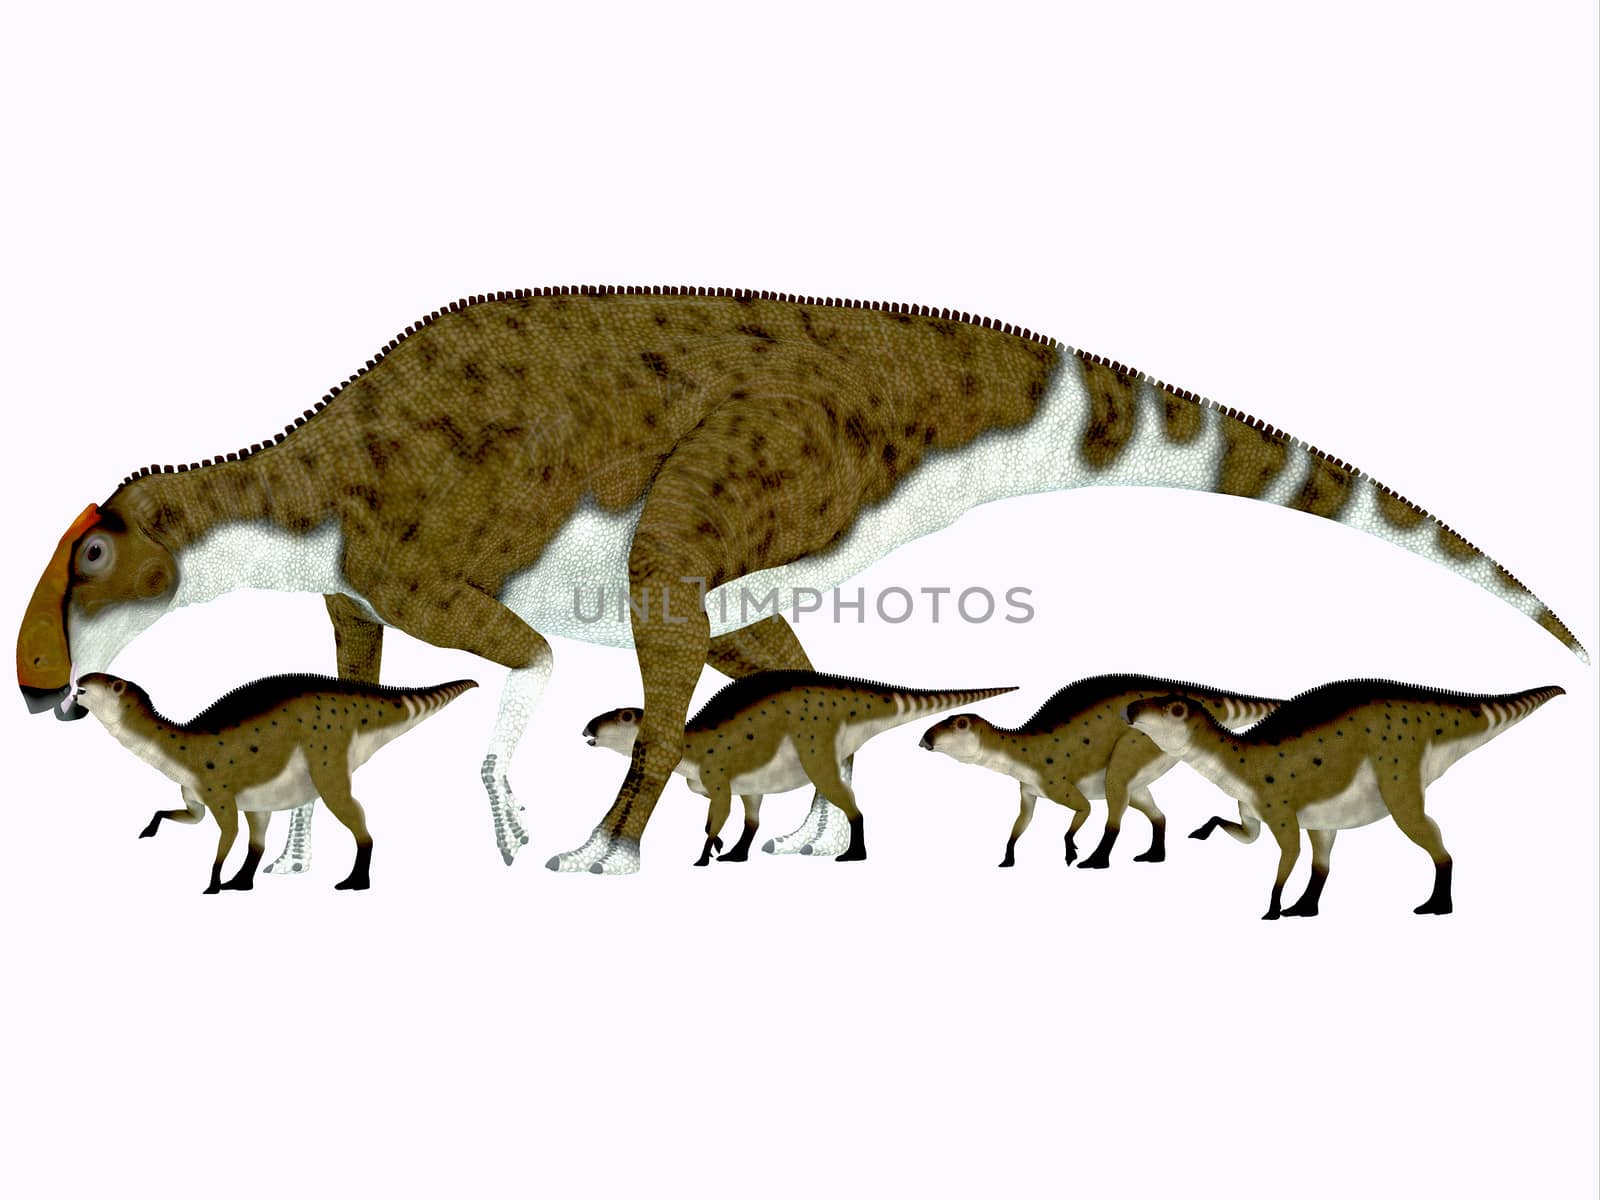 Brachylophosaurus was a herbivorous hadrosaur dinosaur that lived during the Cretaceous Period of Alberta, Canada and Montana, North America.